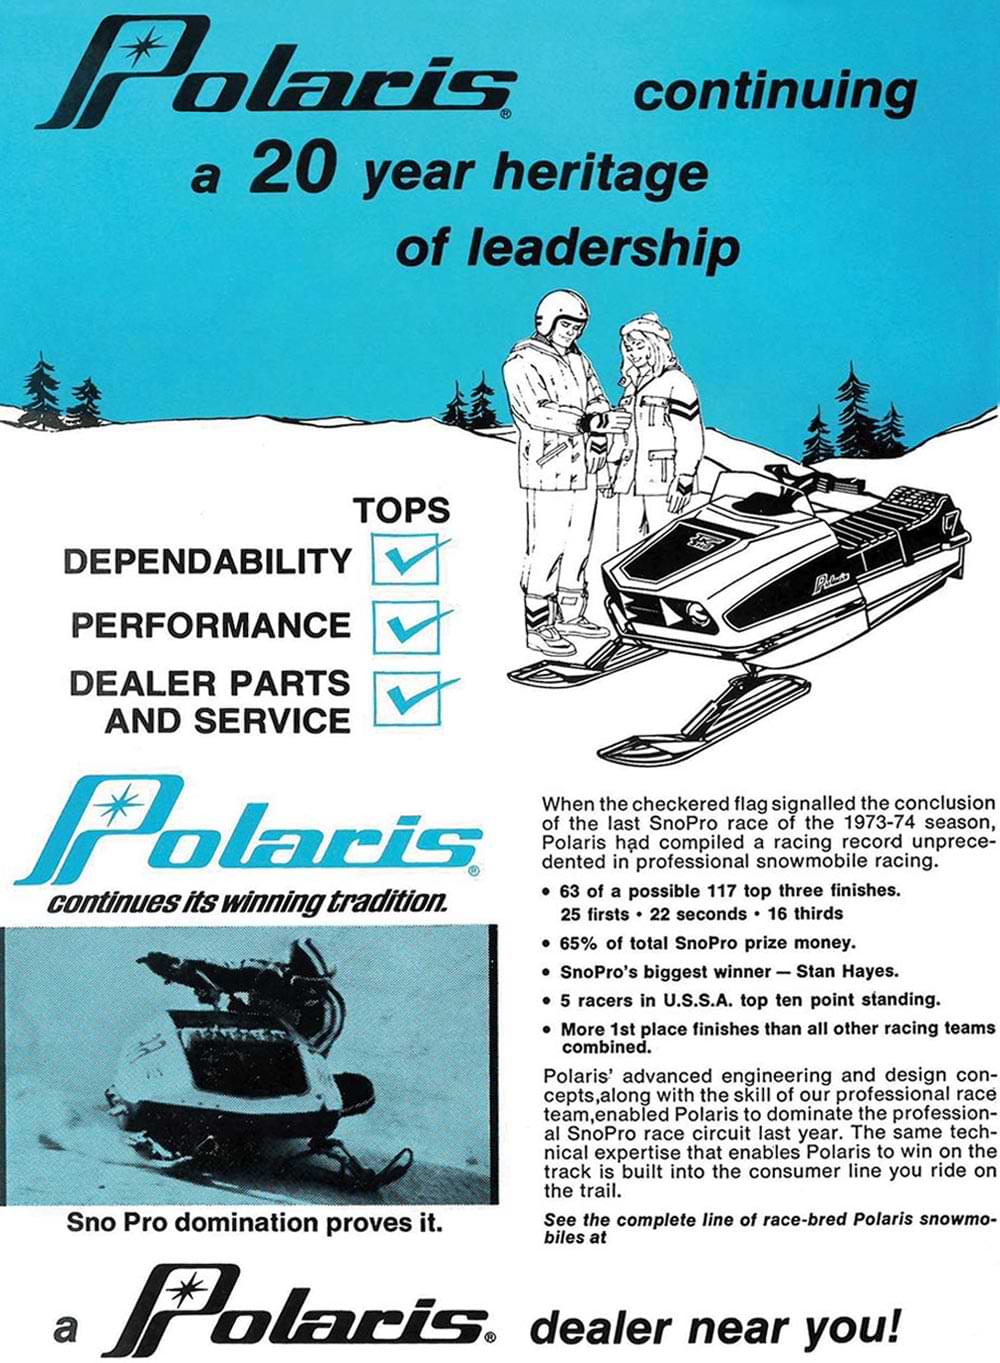 Polaris advertisement from the 70s